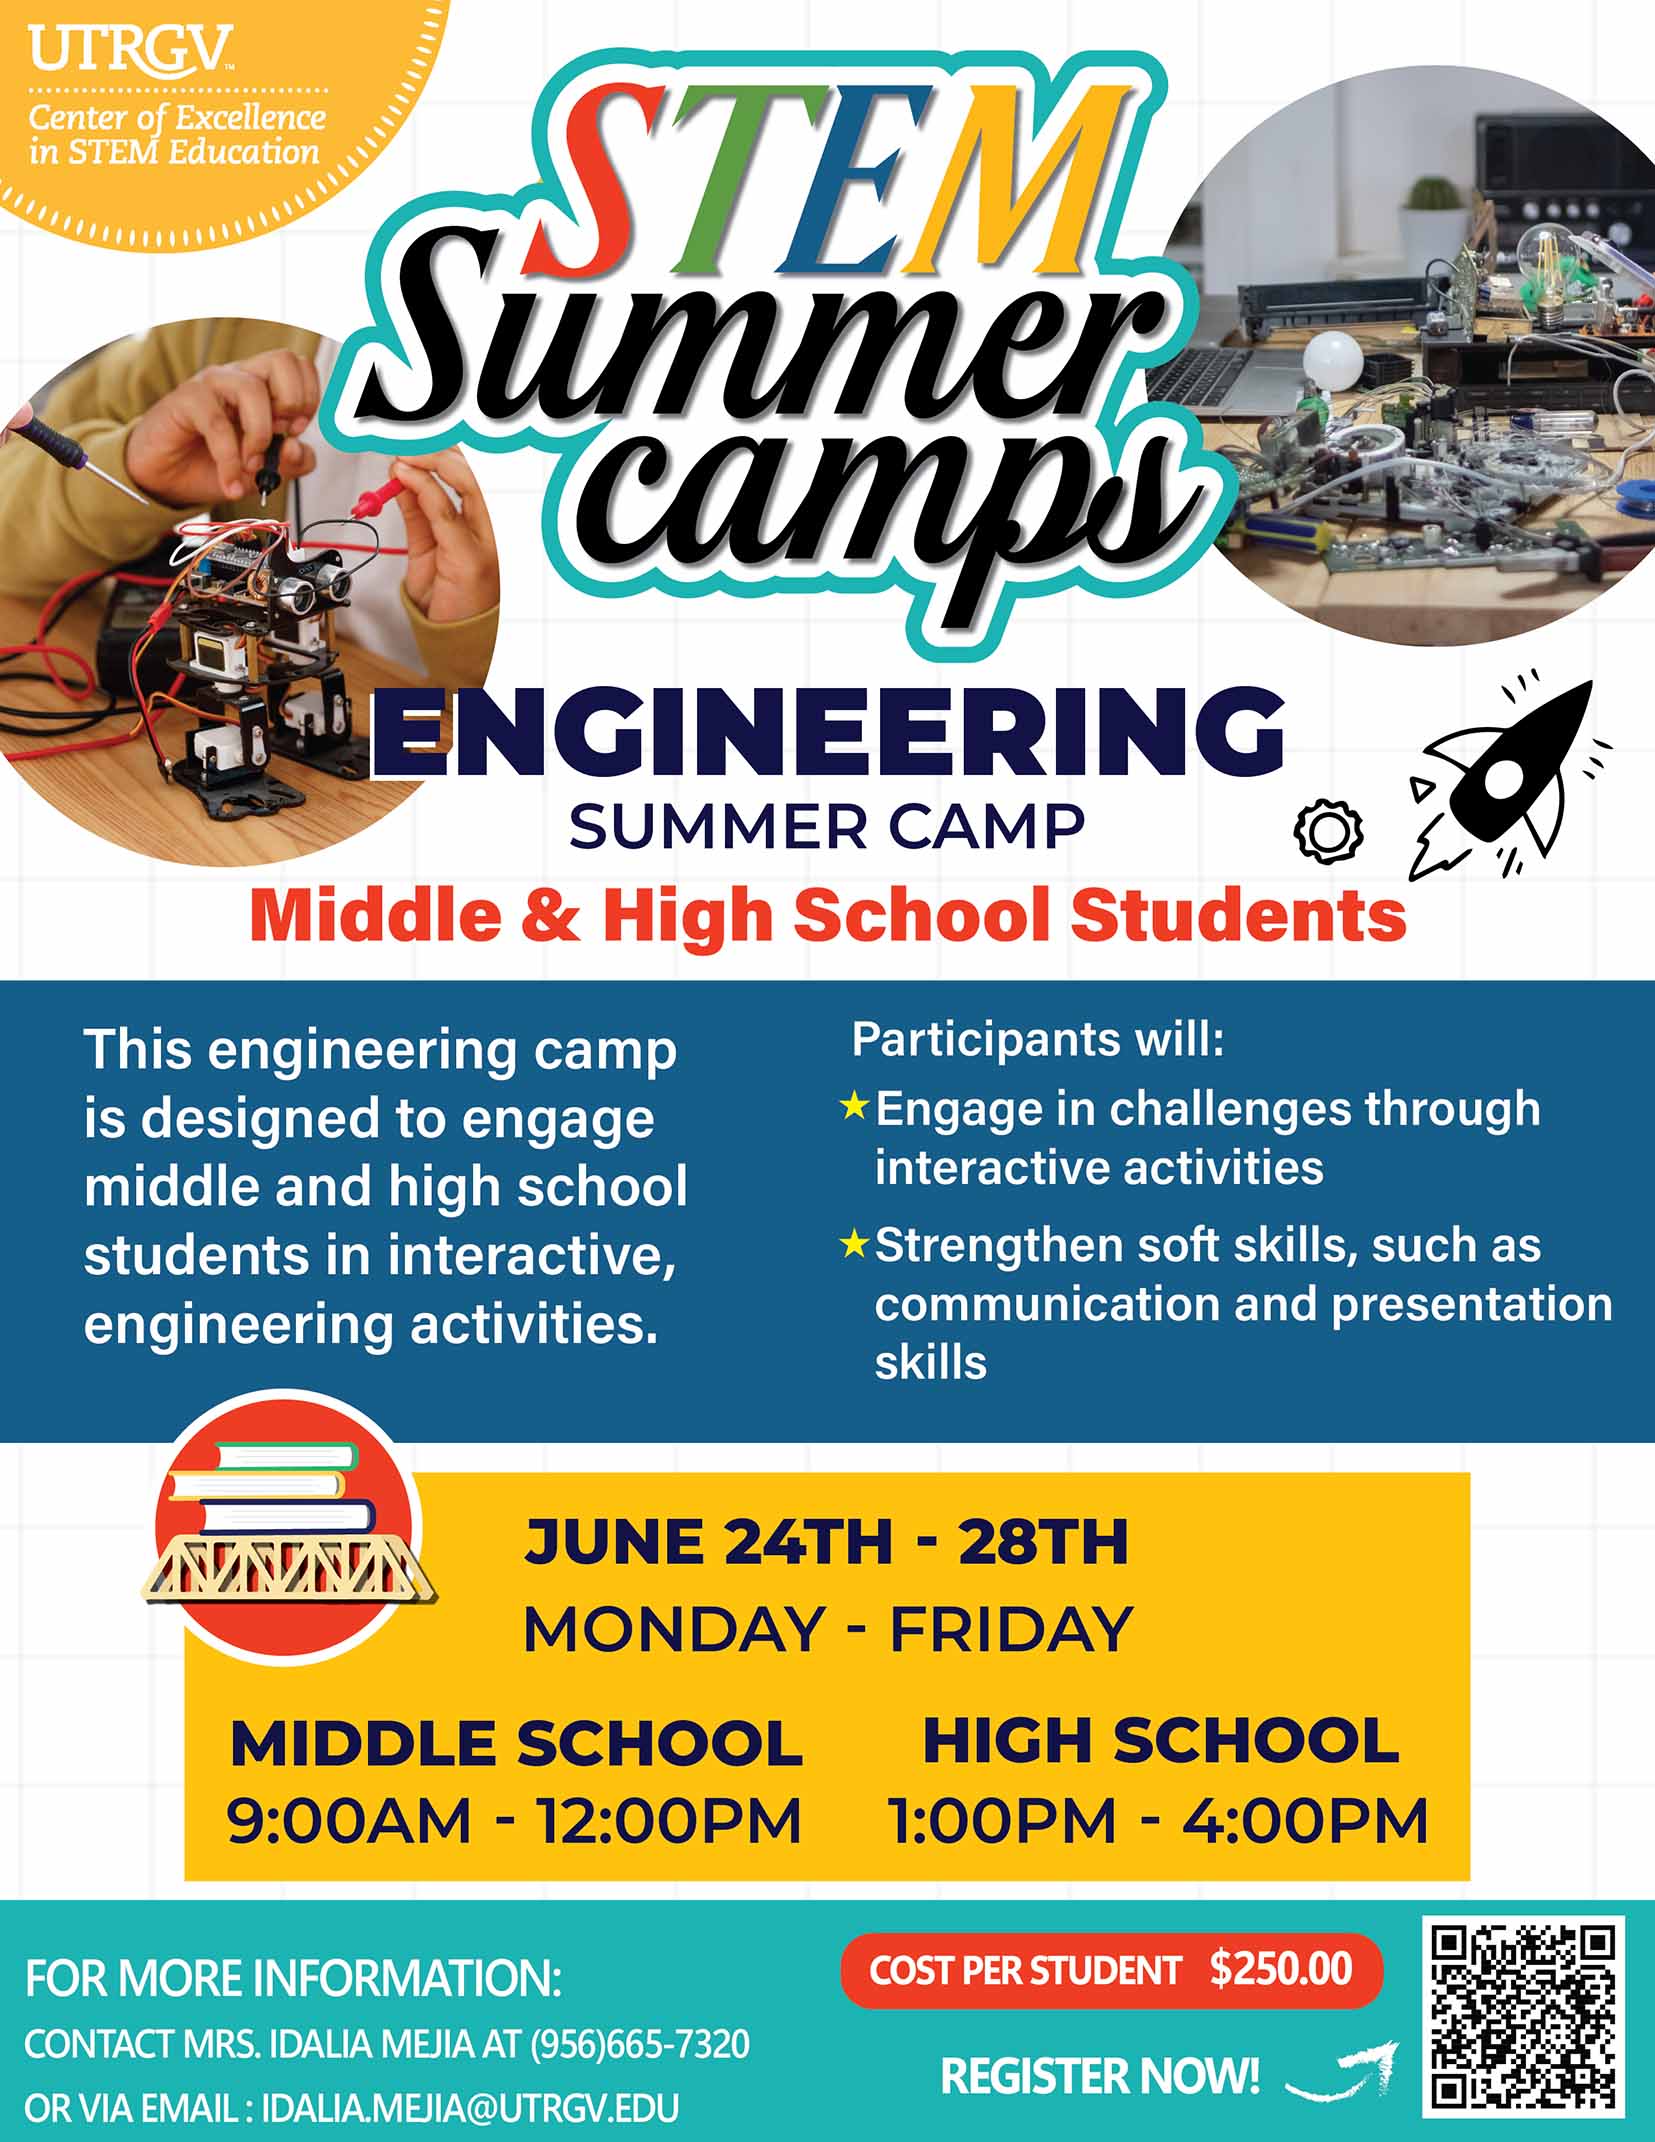 STEM Engineering Camp | $180 Register Now! | Engineering consisting of constructing and developing tools for the betterment of society. In this camp, students will be introduced to renewable sources of energy through interactive activities. | Participants will: Engage in energy challenges, implemented the steps of the Engineering Design Process, and Design, build, and test their own models. June 10-14th: Week 1: Morning Session - 6th to 8th grade. Afternoon Session - High school (9th-12th) | Morning Session: 9:00 a.m - 12:00 p.m. Afternoon Session: 1:00 p.m. - 4:00 p.m. Session hours apply to all camps